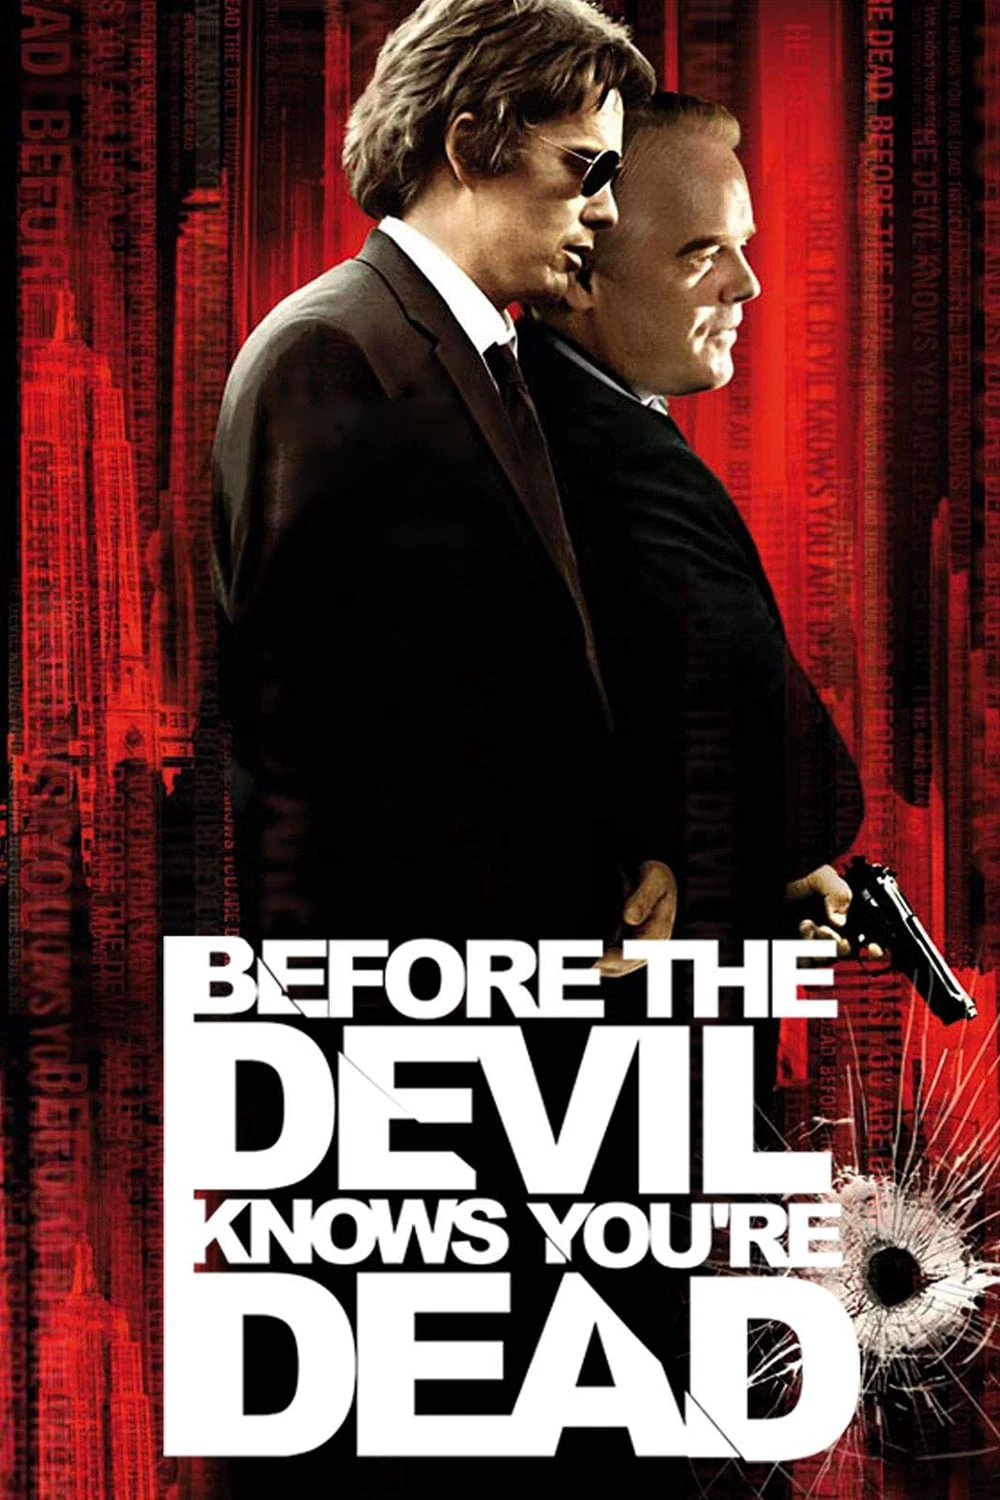 Before the Devil Knows You're Dead | Before the Devil Knows You're Dead (2007)